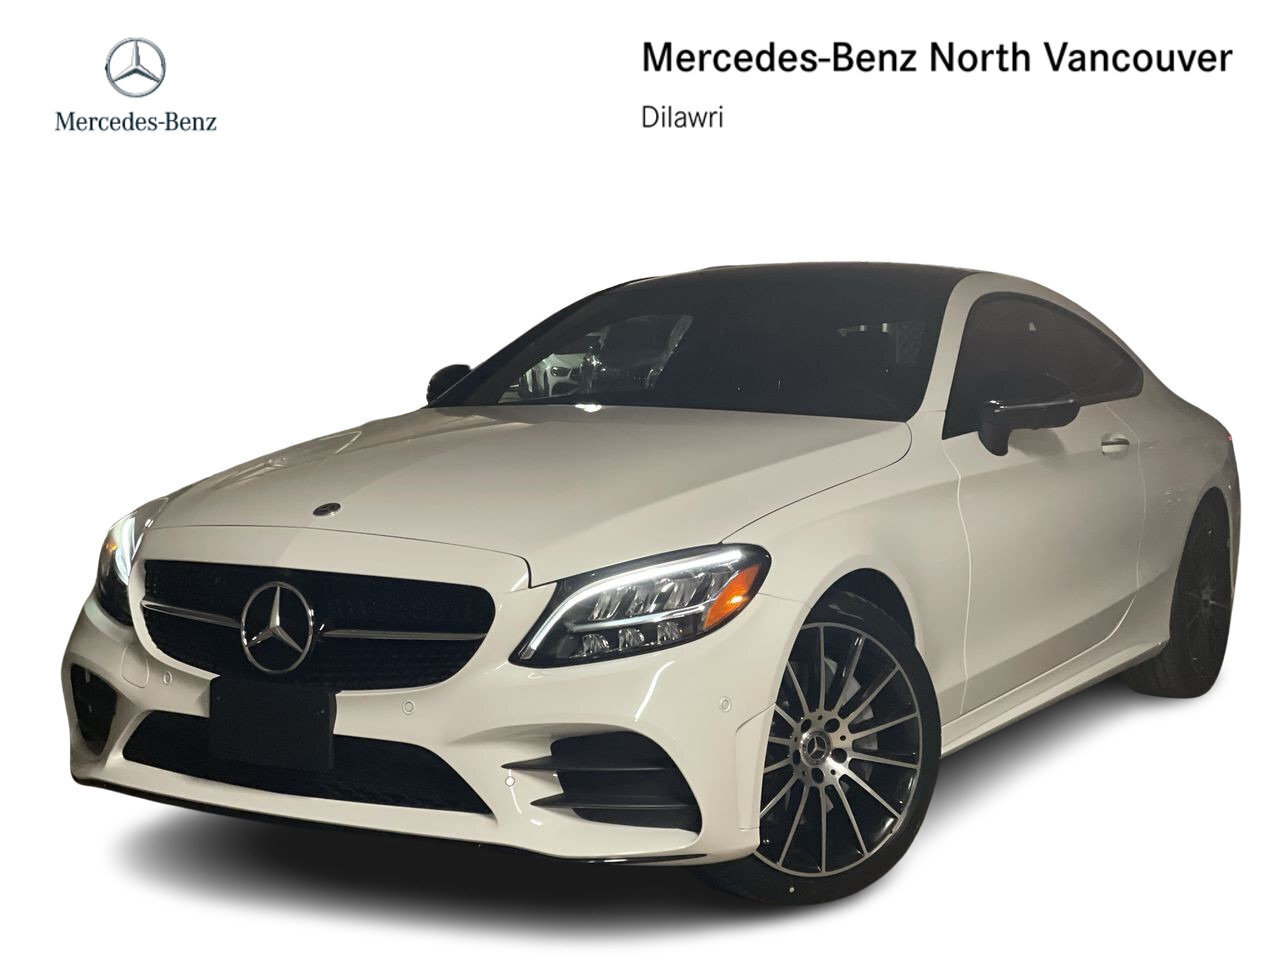 2023 Mercedes-Benz C-Class C 300 4MATIC Lease rates starting at 2.49%!